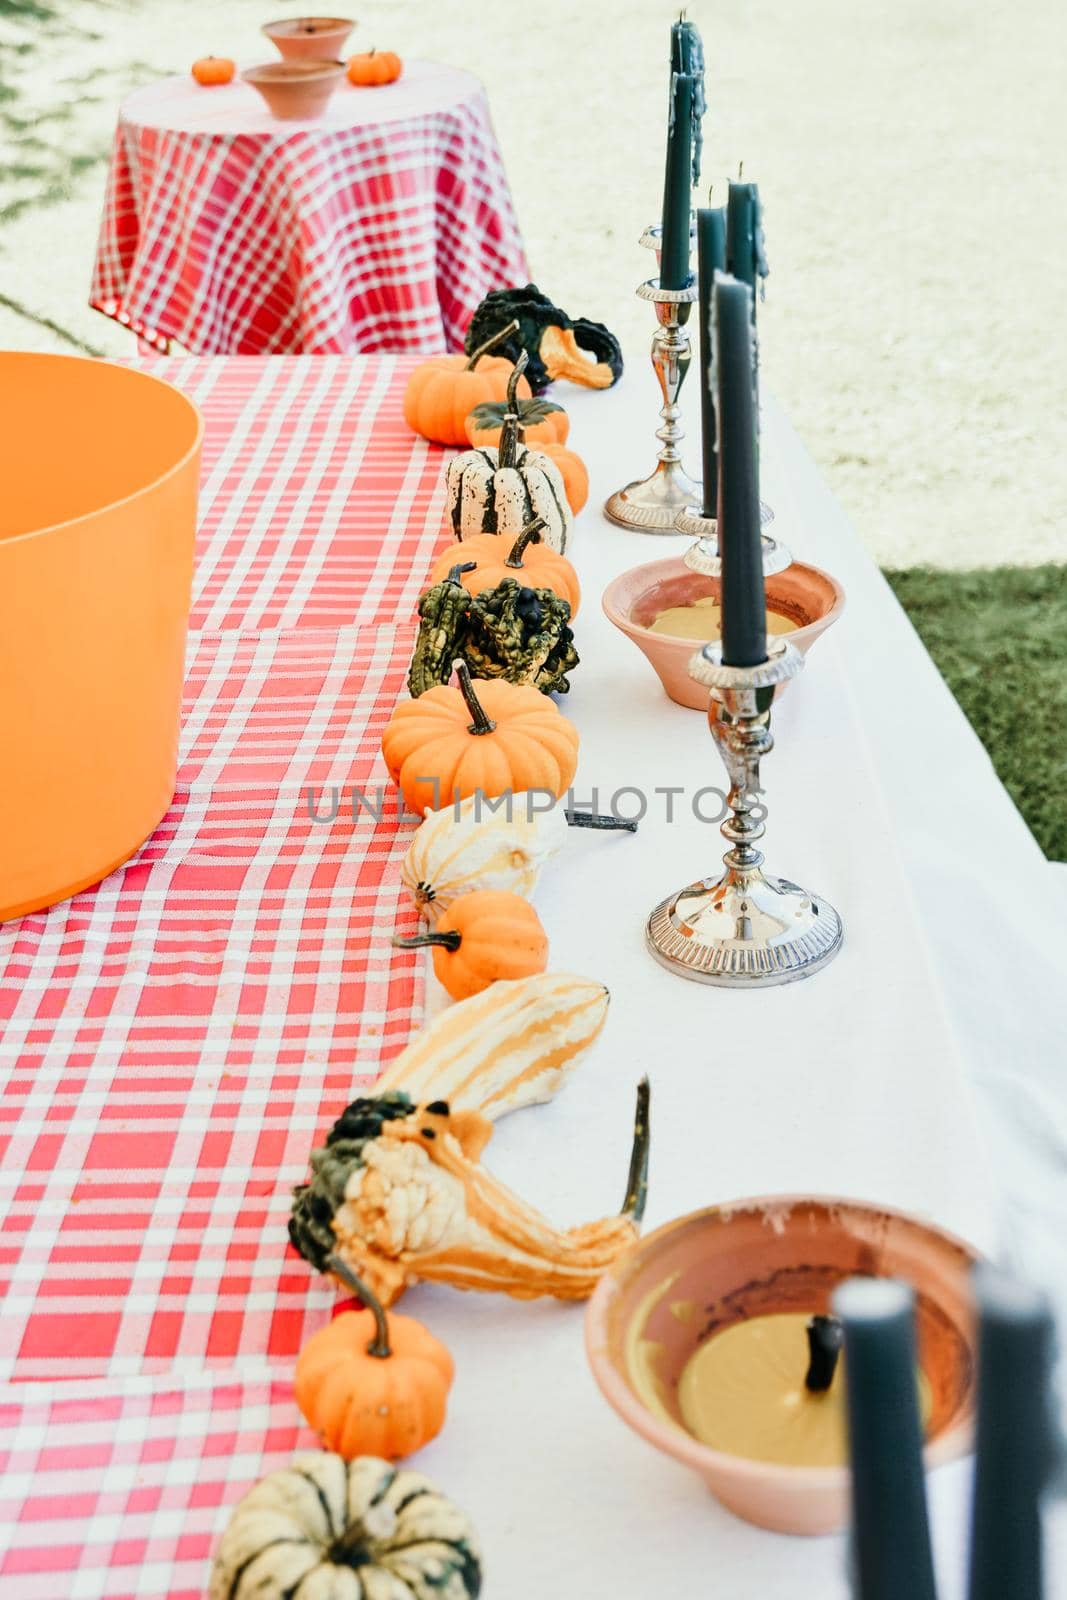 Different kinds of pumpkins on the table with candles in the garden